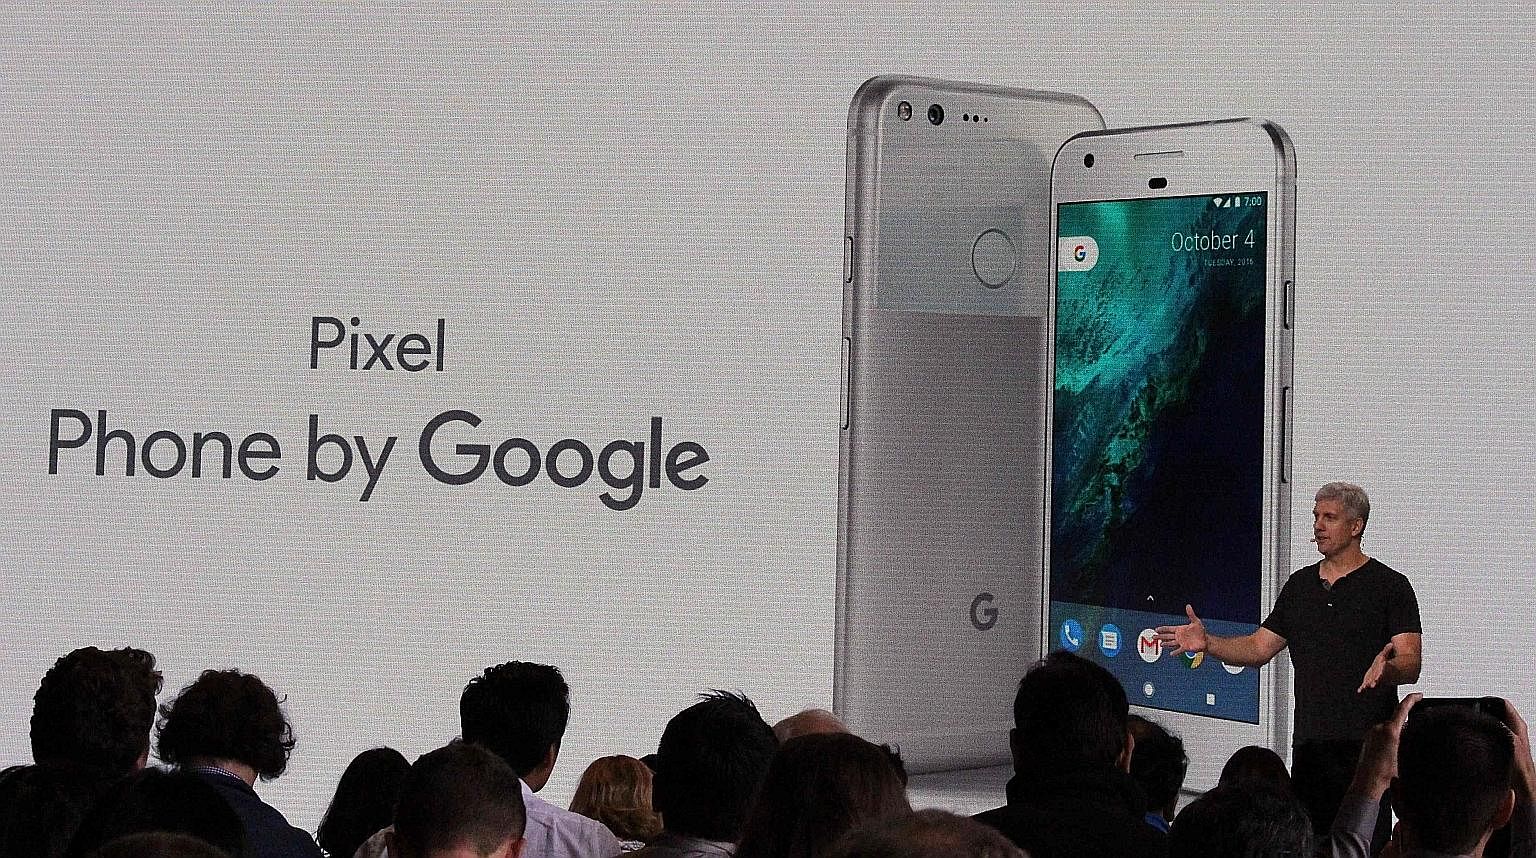 With Pixel, Google is aiming for a bigger slice of the competitive smartphone market, which is dominated by Samsung and Apple. The device is the first smartphone with built-in Google Assistant, and is part of a major drive to make artificial intellig